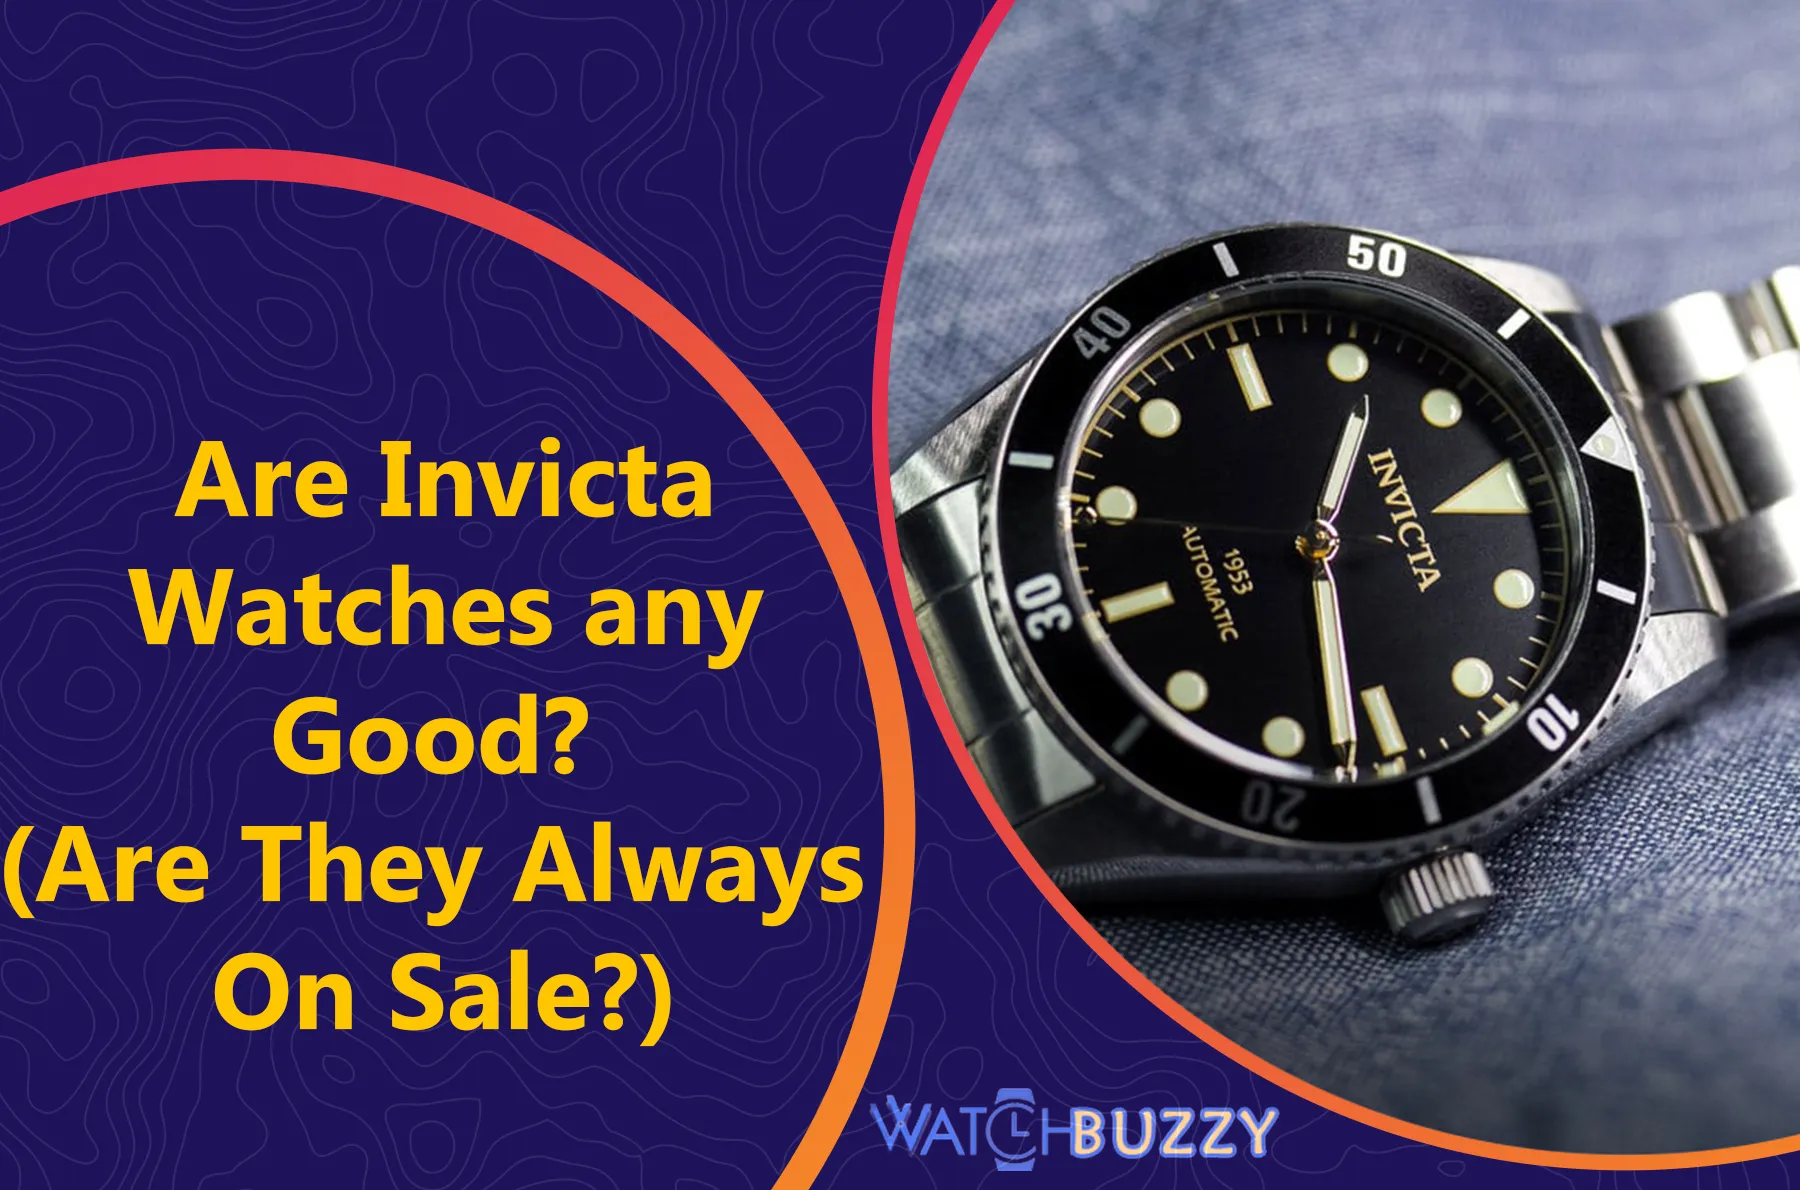 Are Invicta Watches any Good? (Are They Always On Sale?)